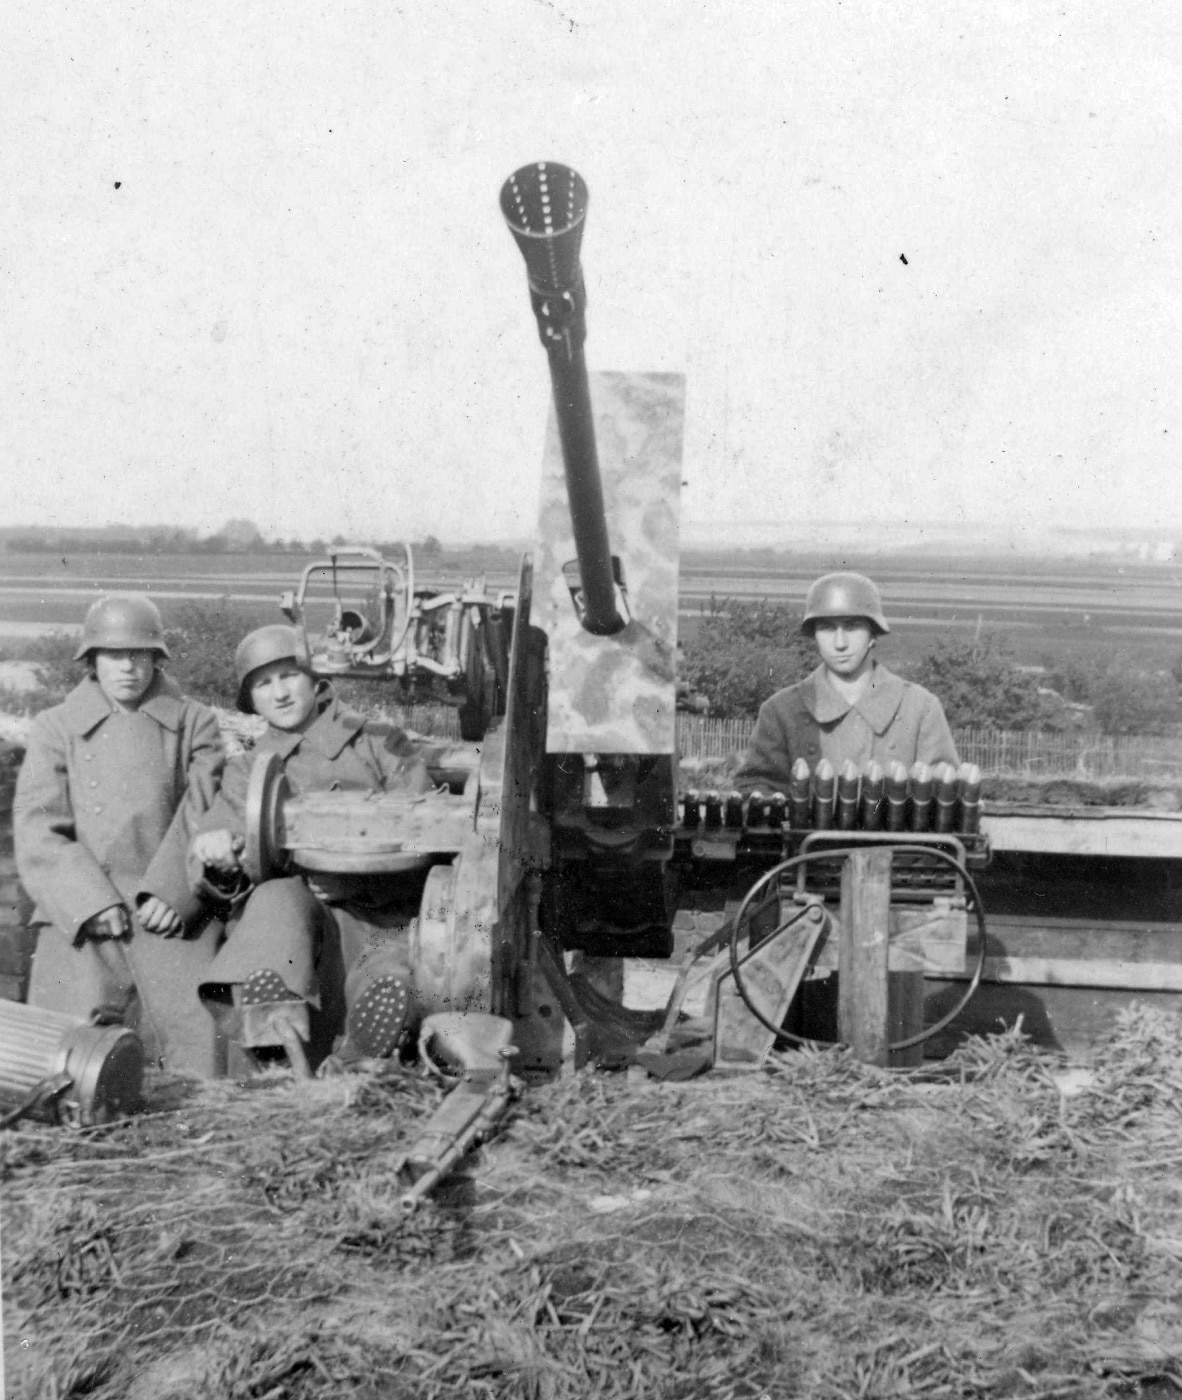 This photo shows a German 37mm AA gun set up to defend the Ploesti oil facilities in Romania. The image shows three German soldiers with ammunition and the gun in a trench. In the foreground is a blot action rifle. The soldiers are all wearing helmets and uniform trench coats. One of the soldiers has visible hobnailed boots. 